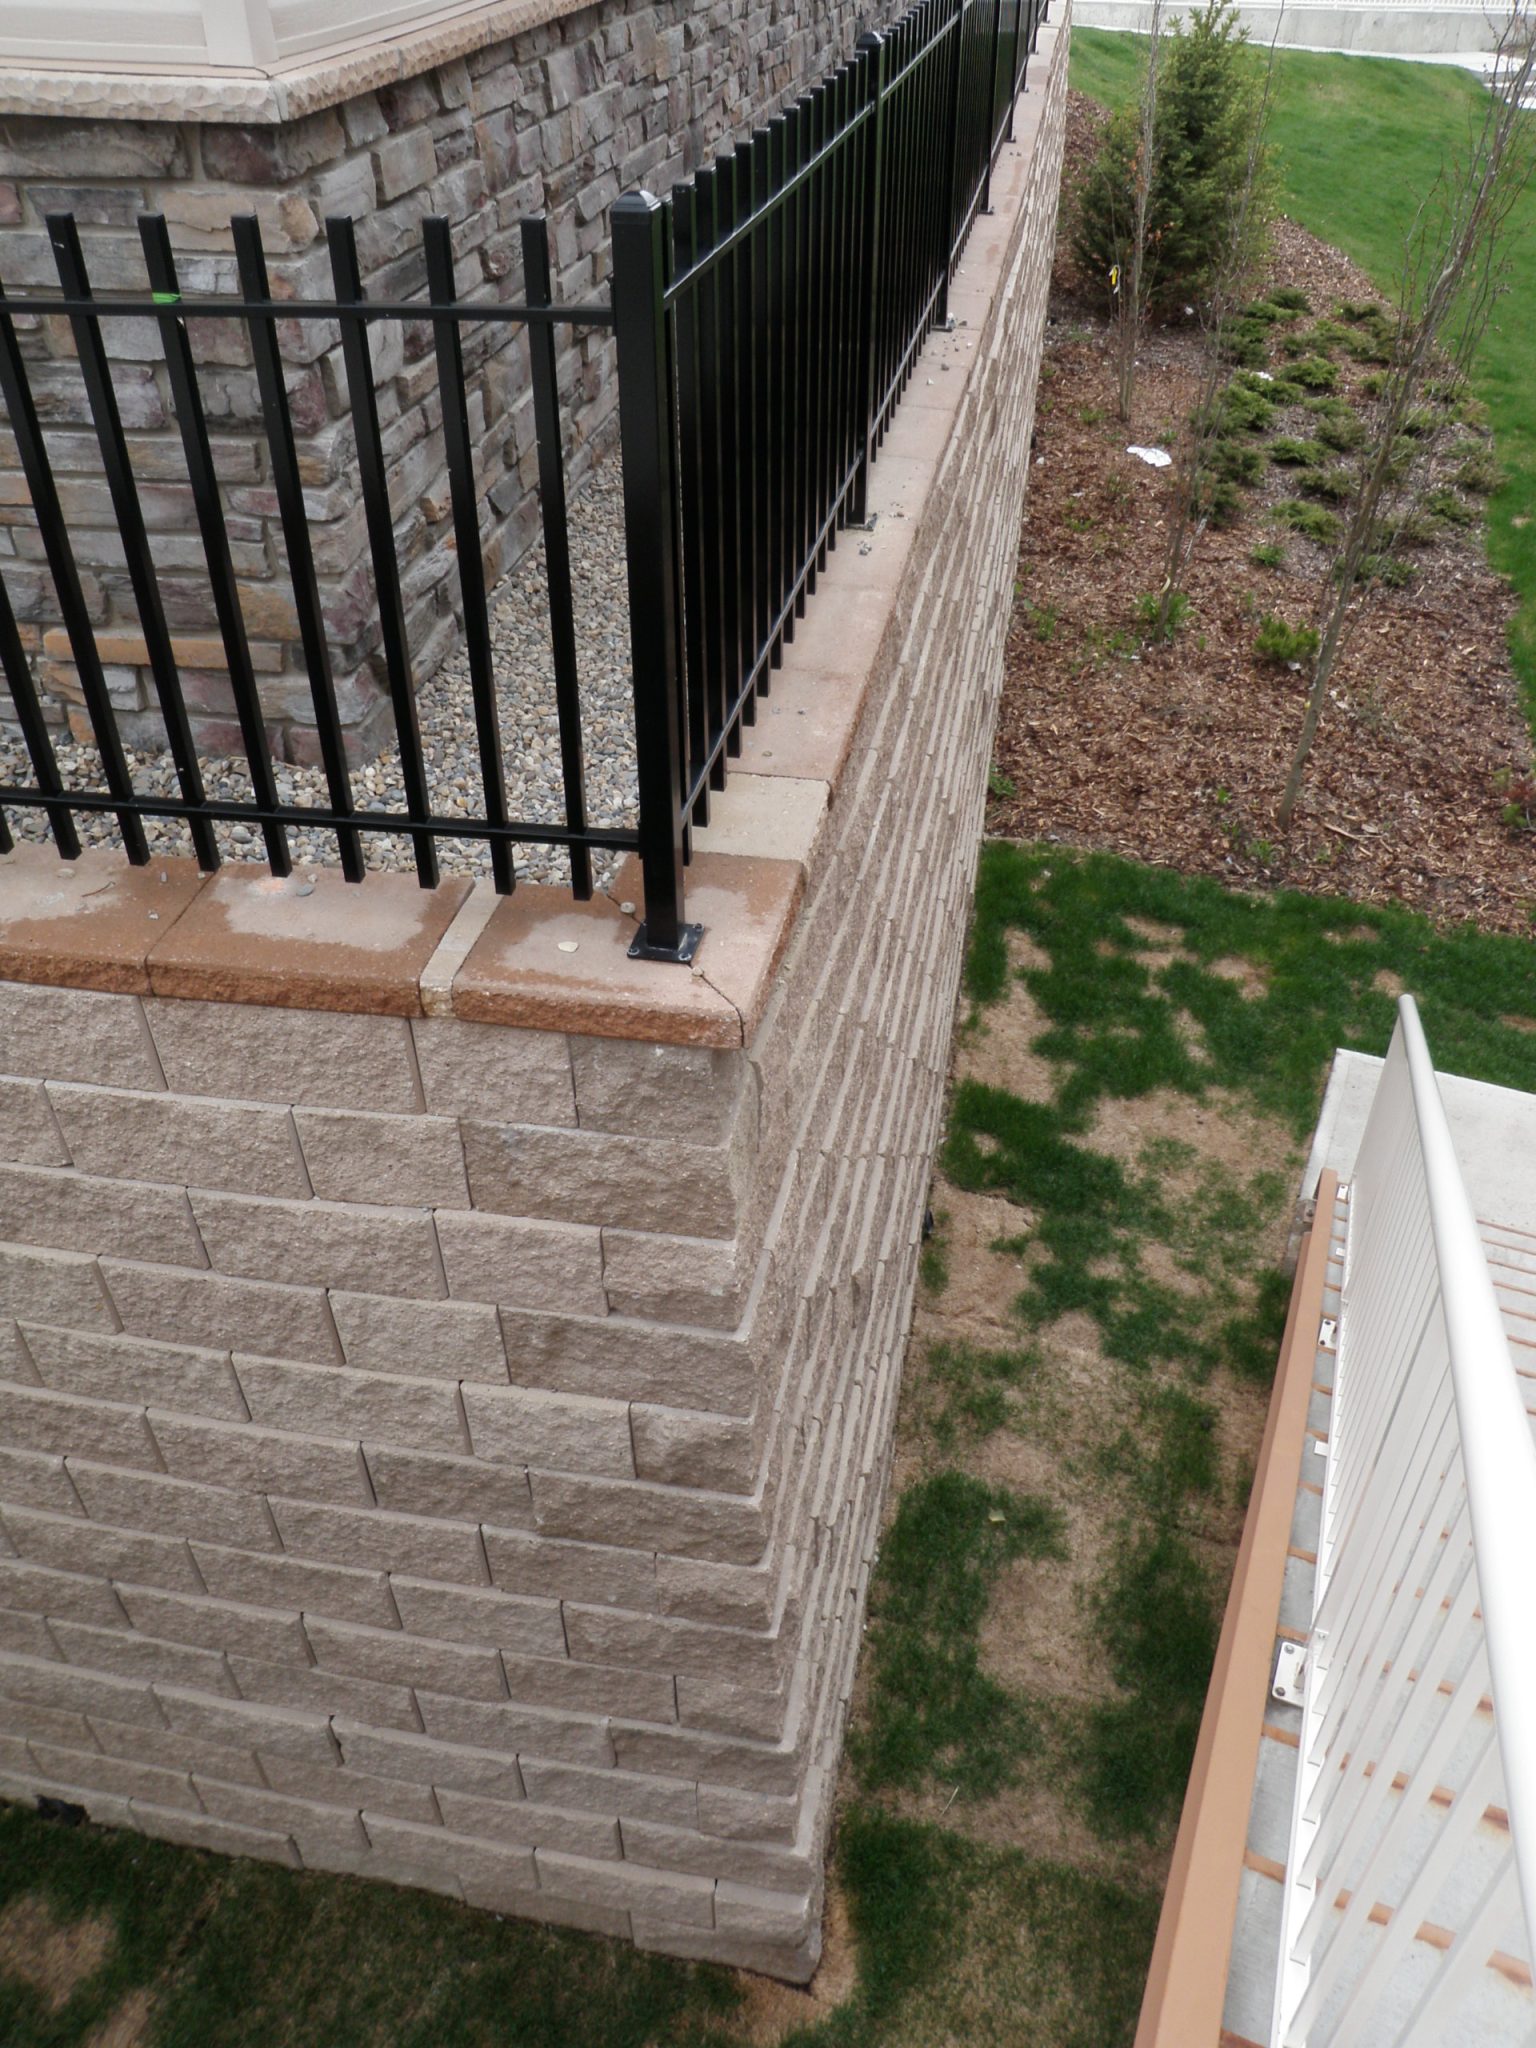 View of CornerStone 100 retaining wall setback from above the wall.